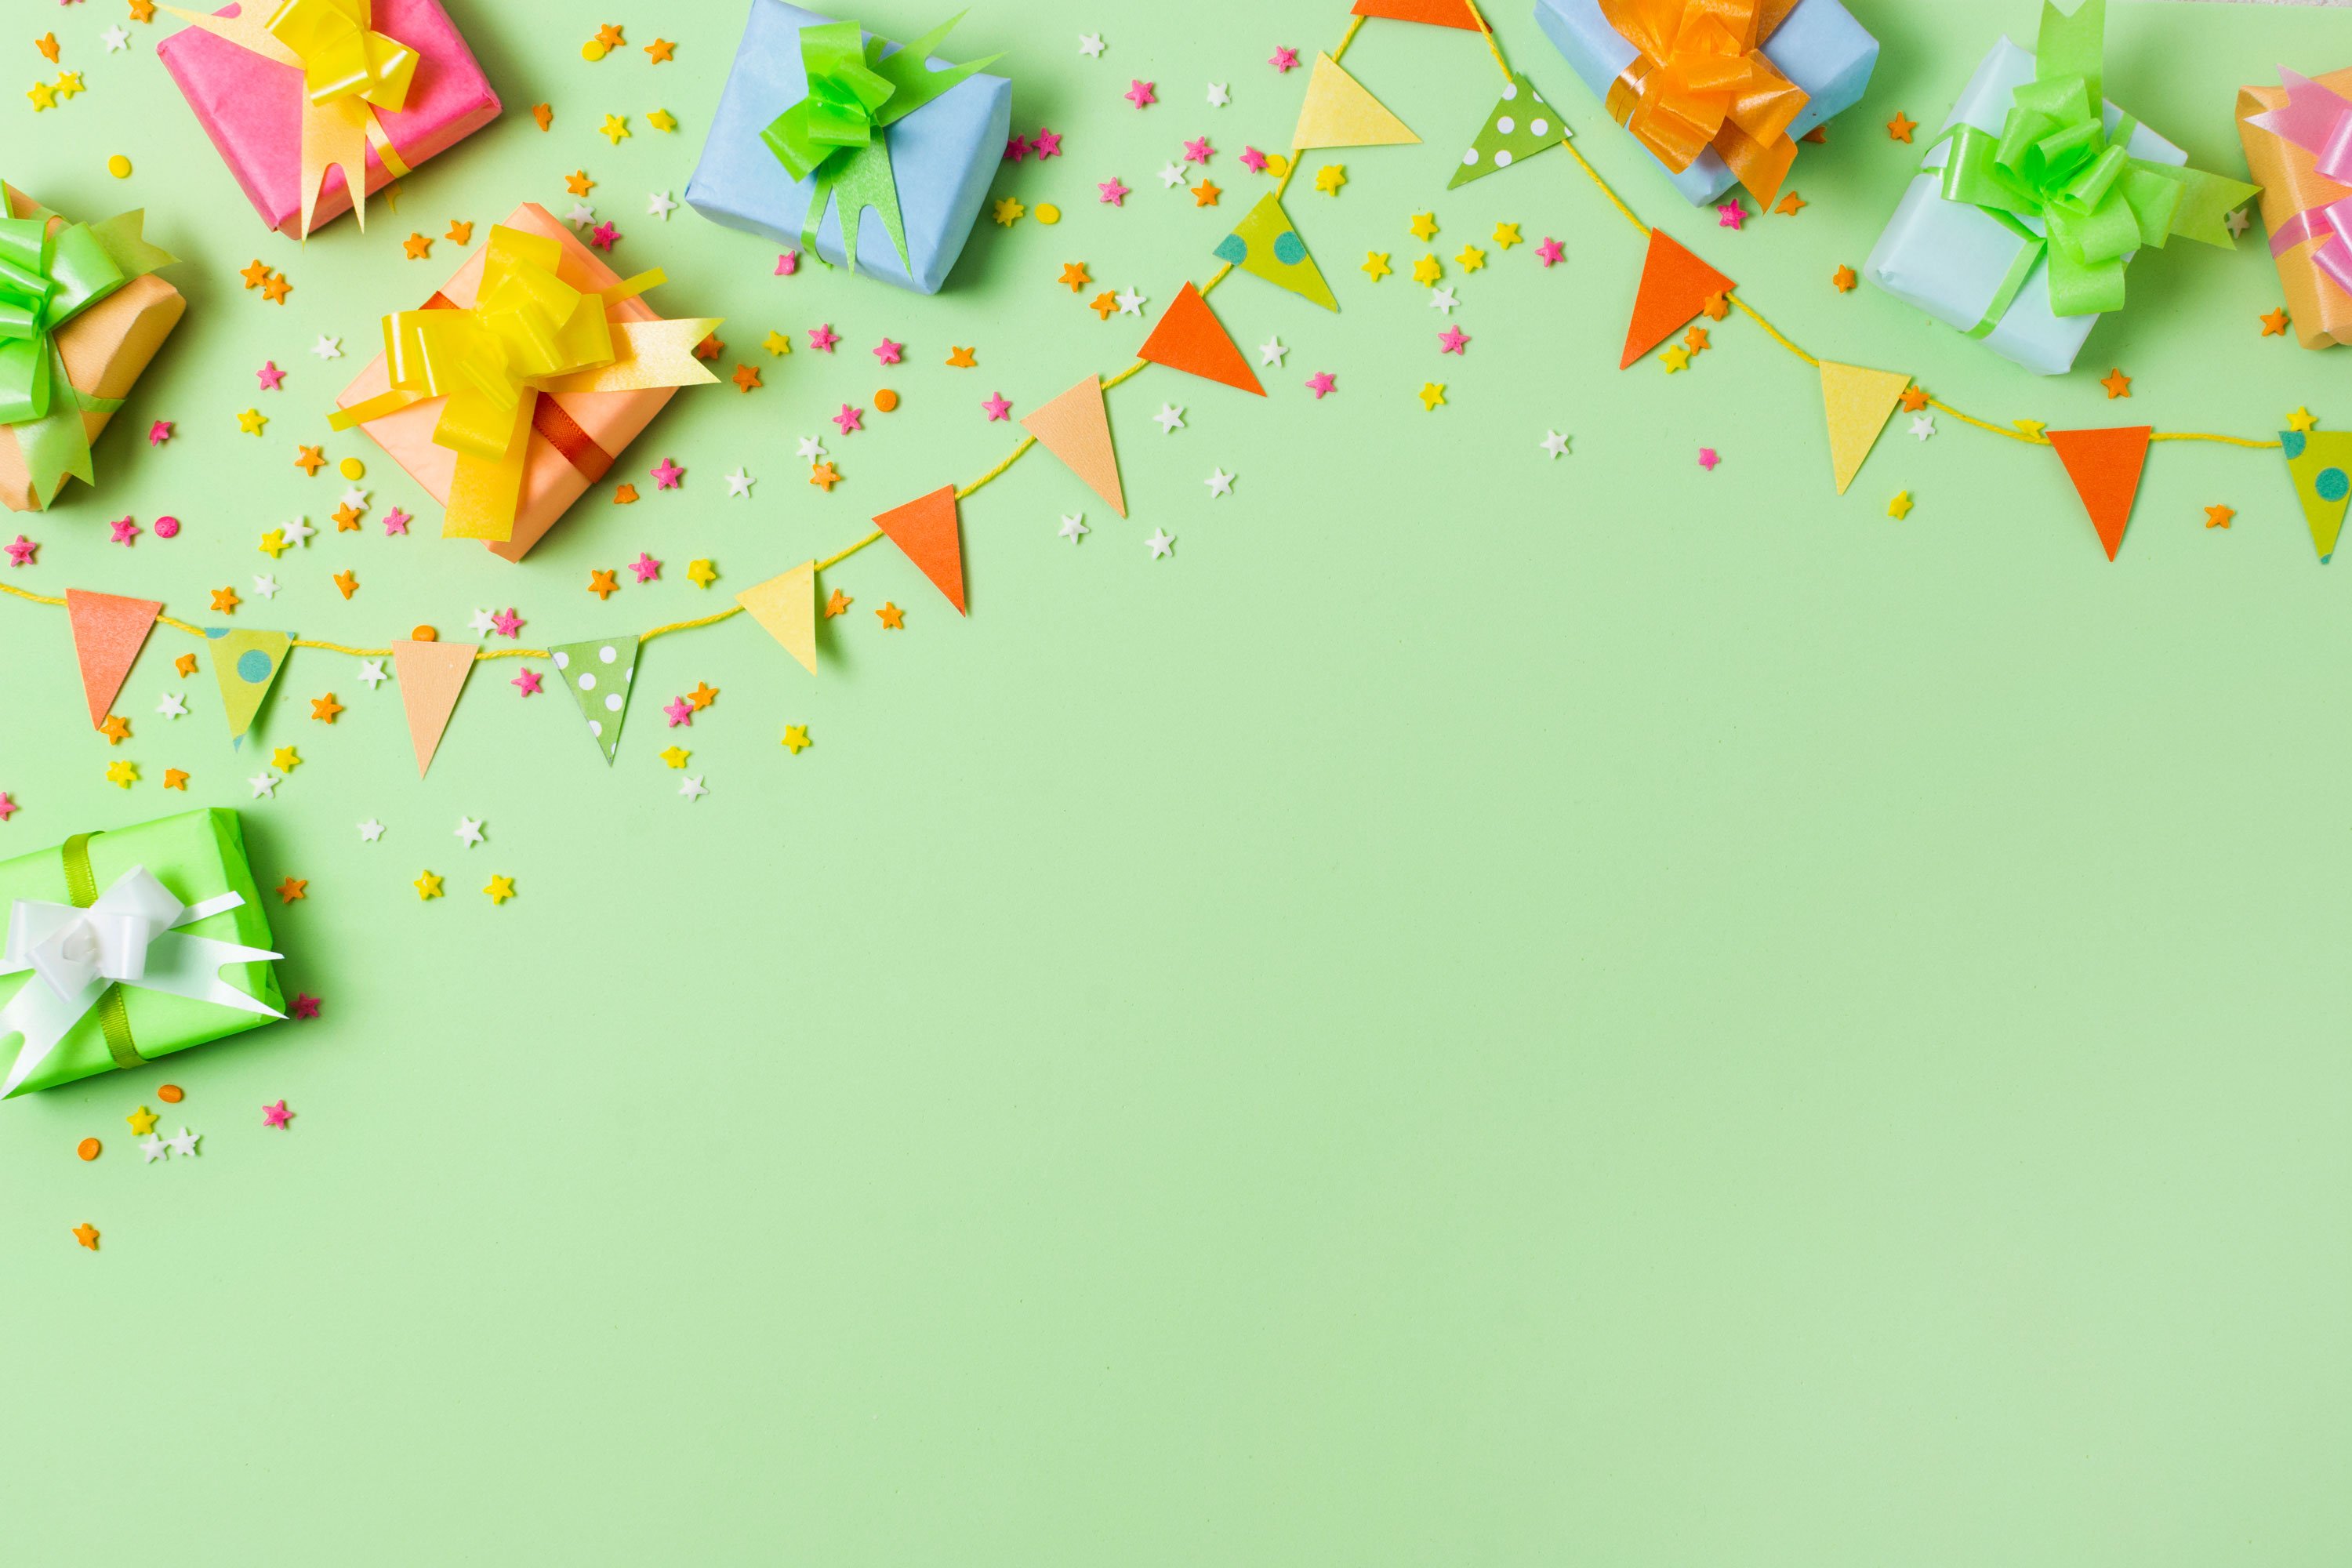 zoom birthday backgrounds free